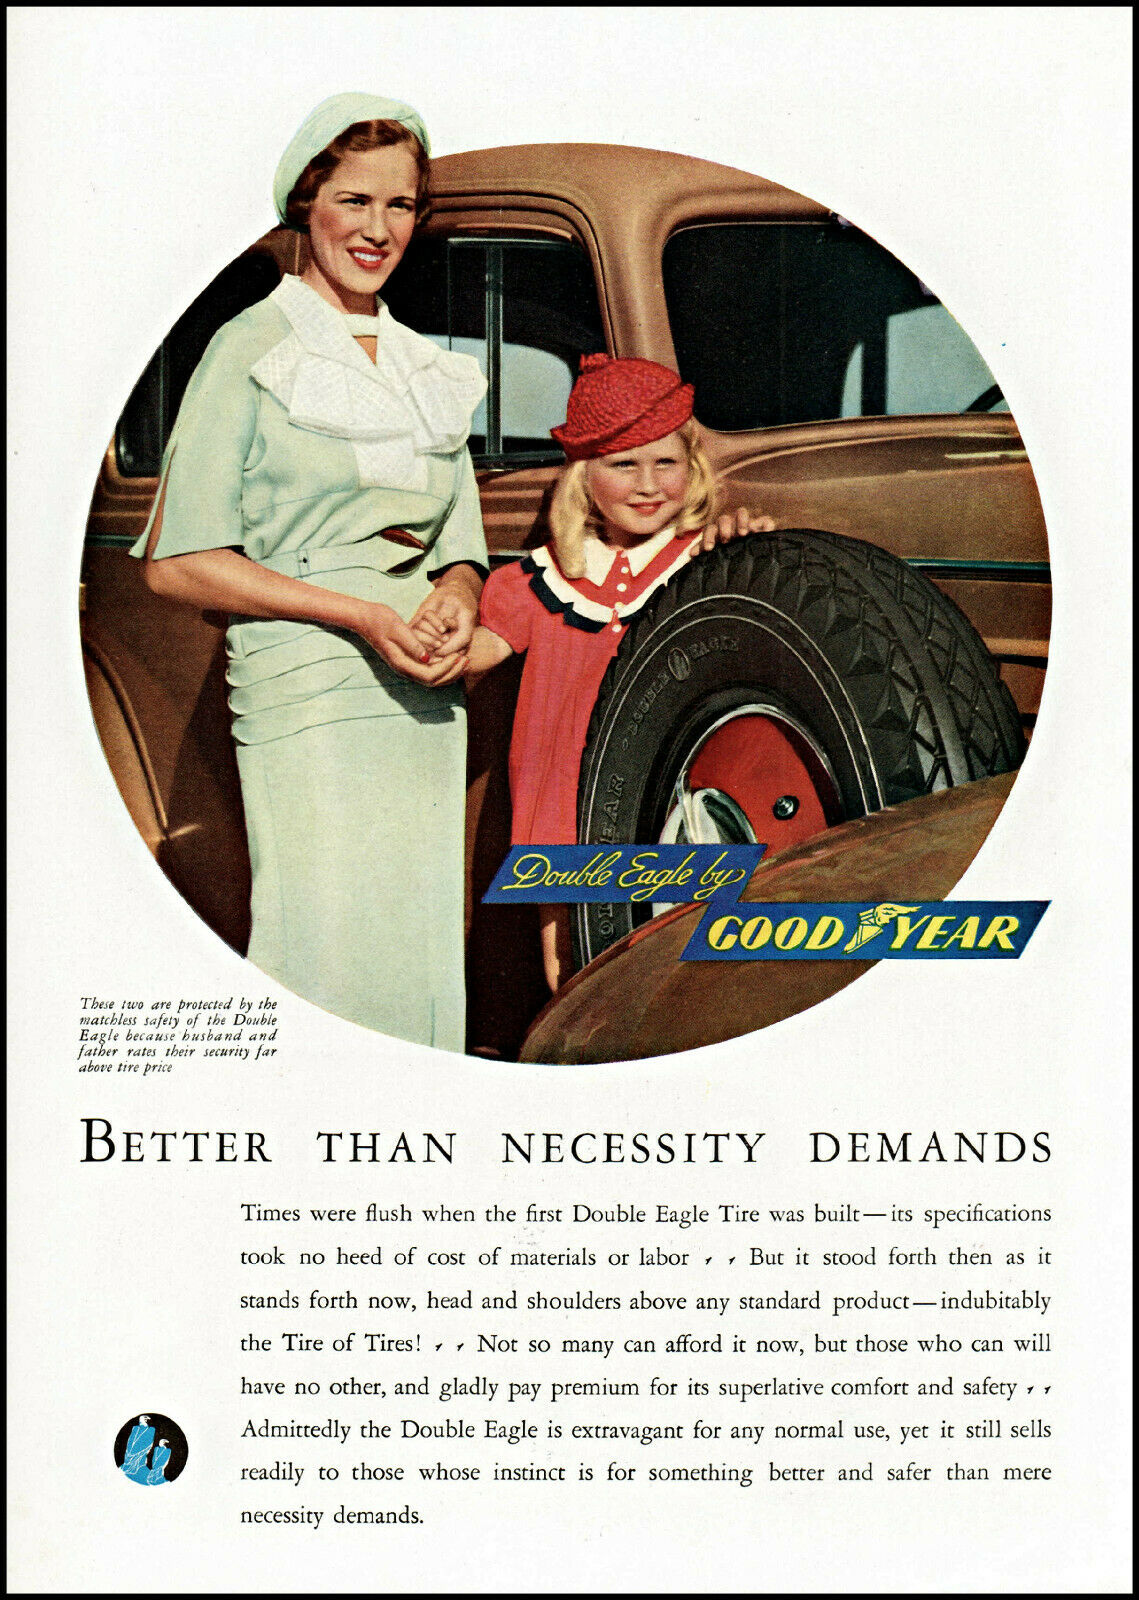 1934 Mom & Daughter Goodyear Double Eagle Car Tires Vintage Photo Print Ad Ads59